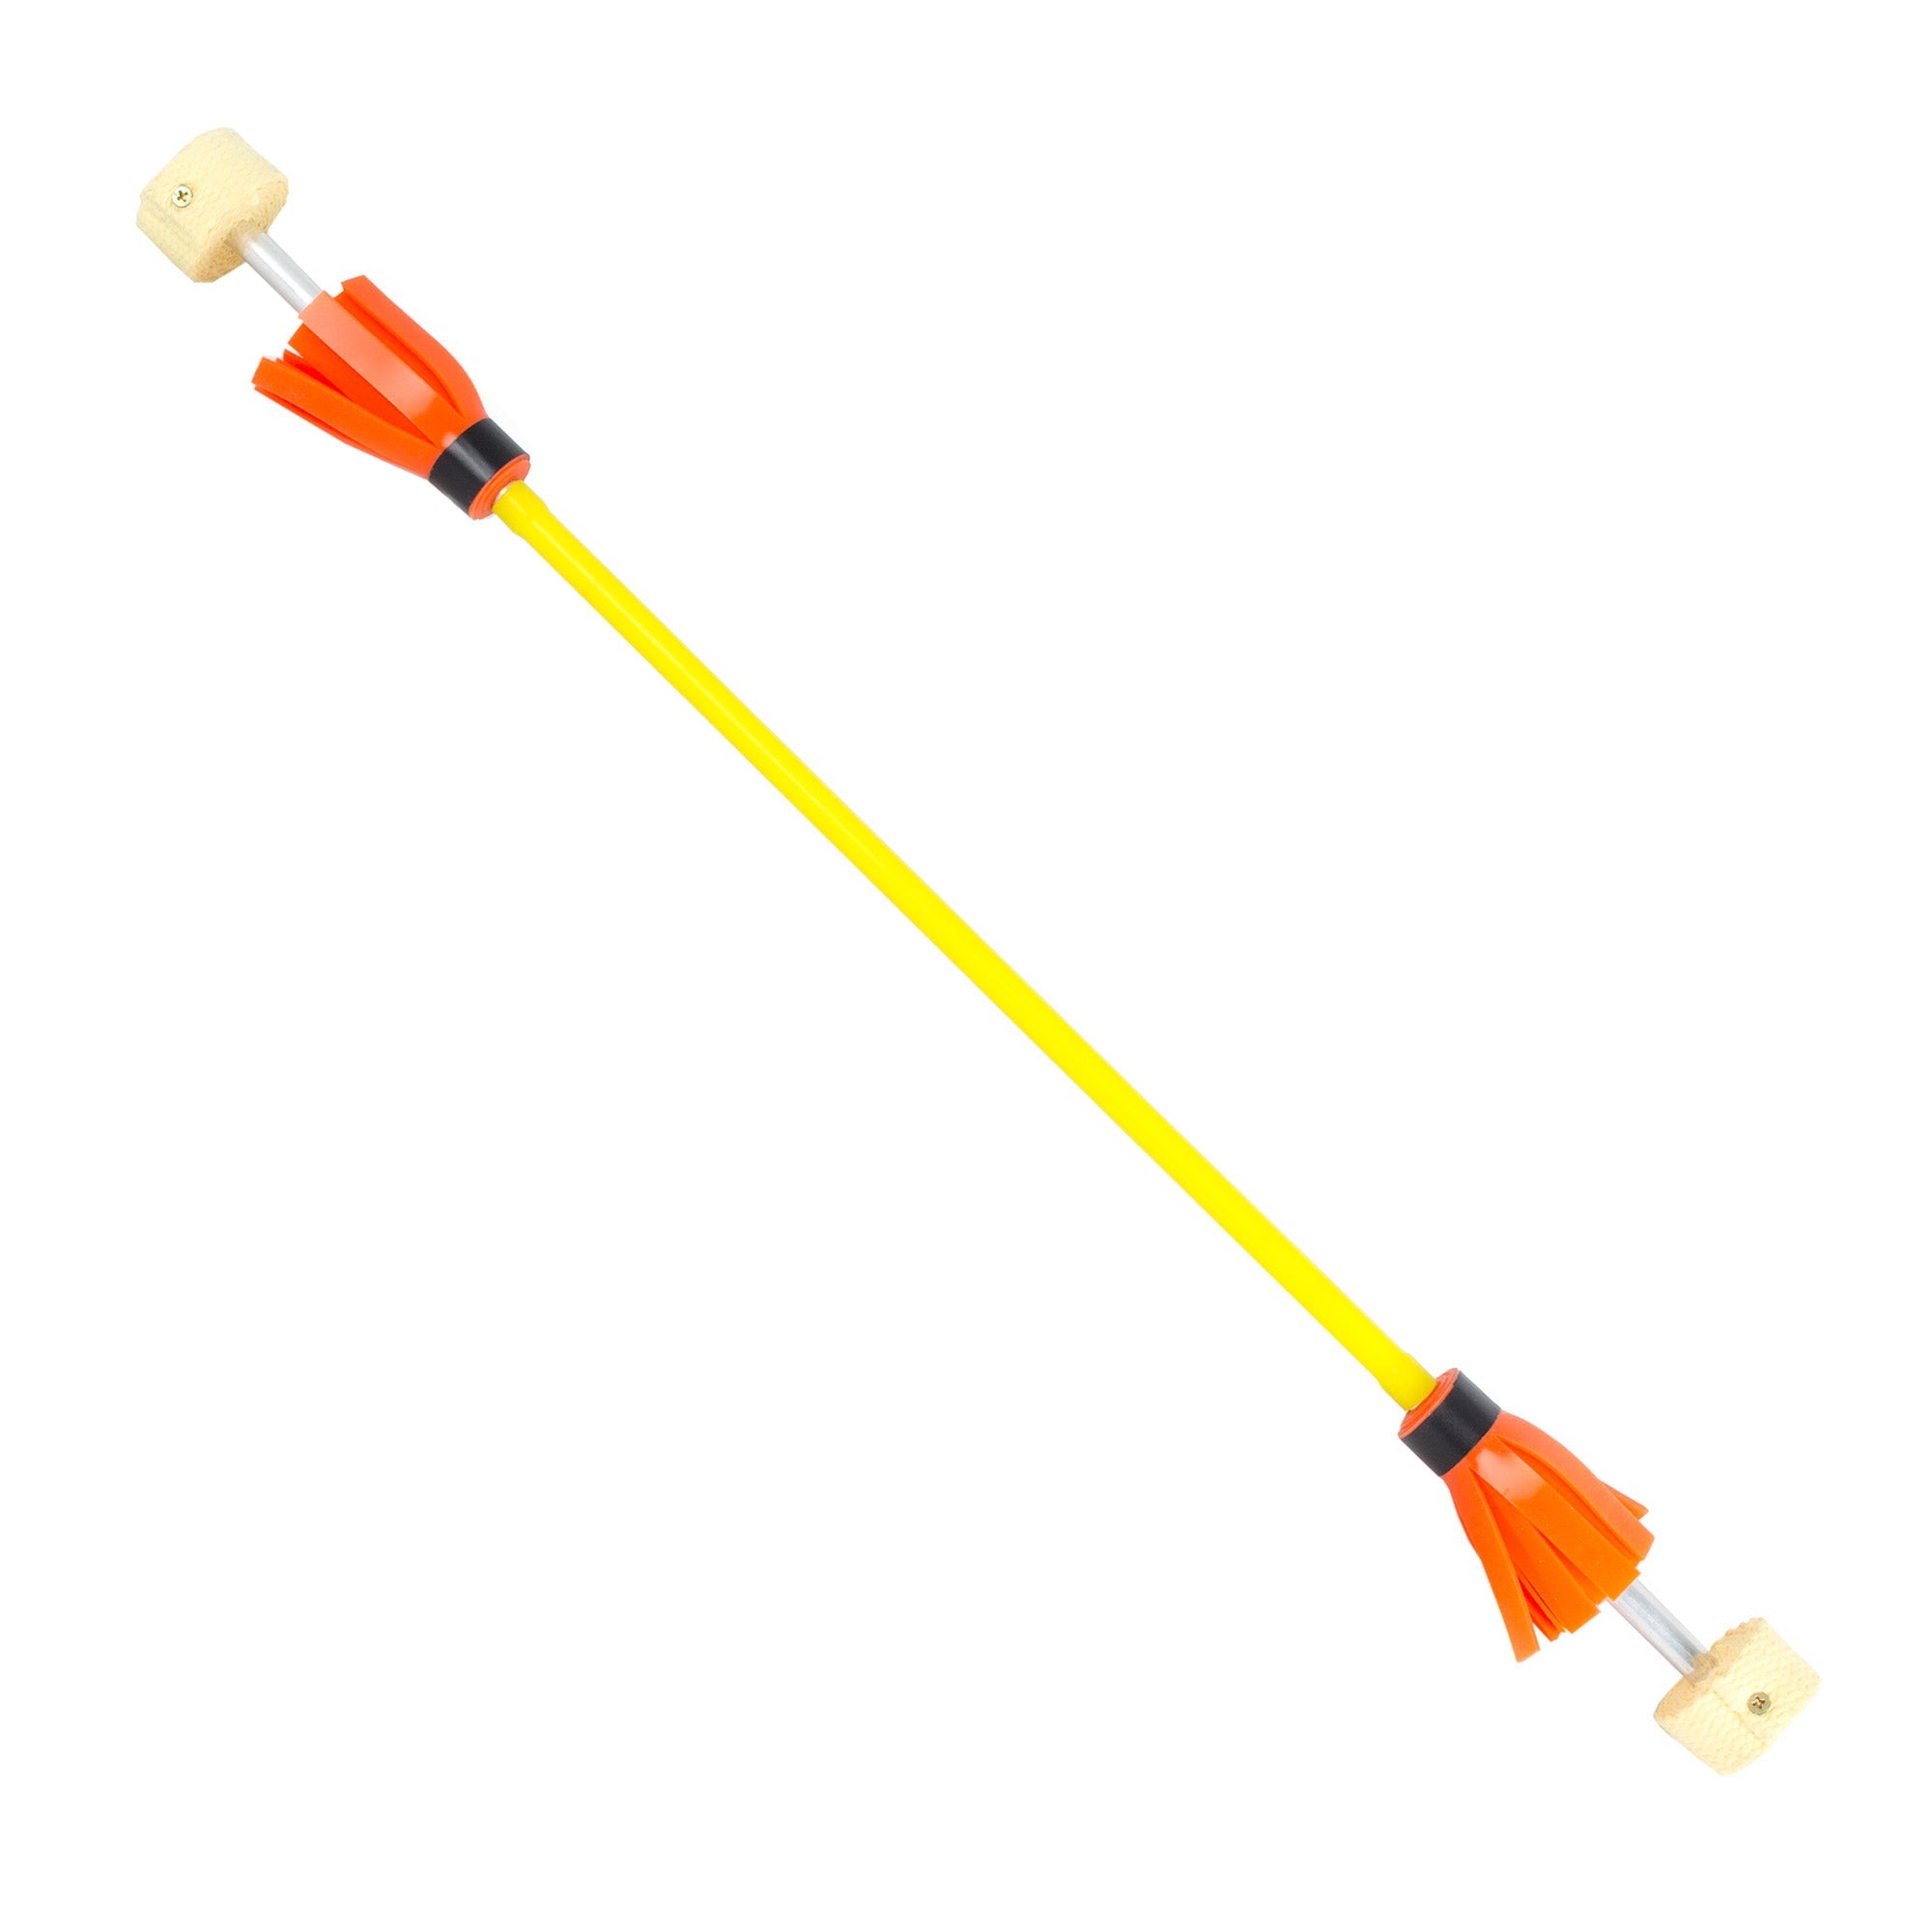 fire flowerstick with yellow silicone and orange tassles